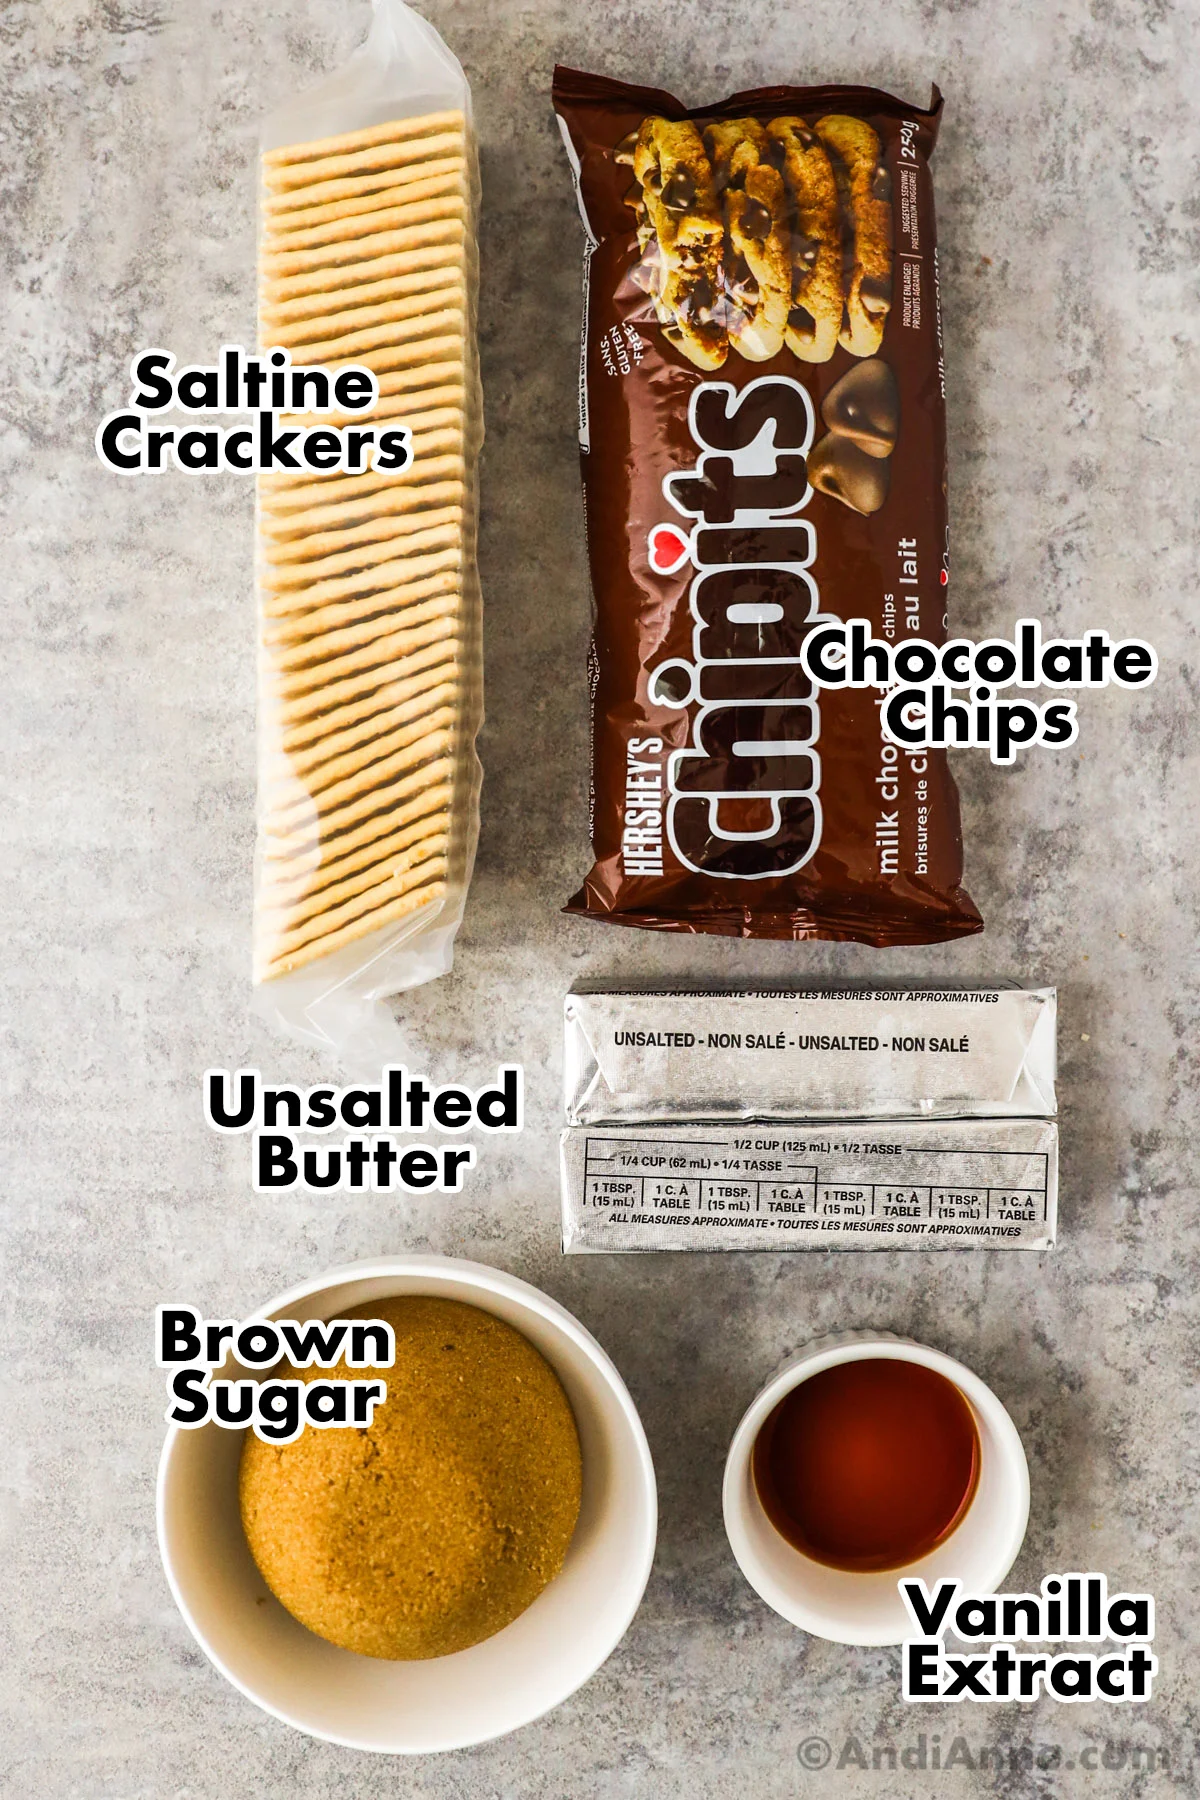 Recipe ingredients including a bag of saltine crackers, bag of chocolate chips, bowl of brown sugar, vanilla extract and unsalted butter sticks.